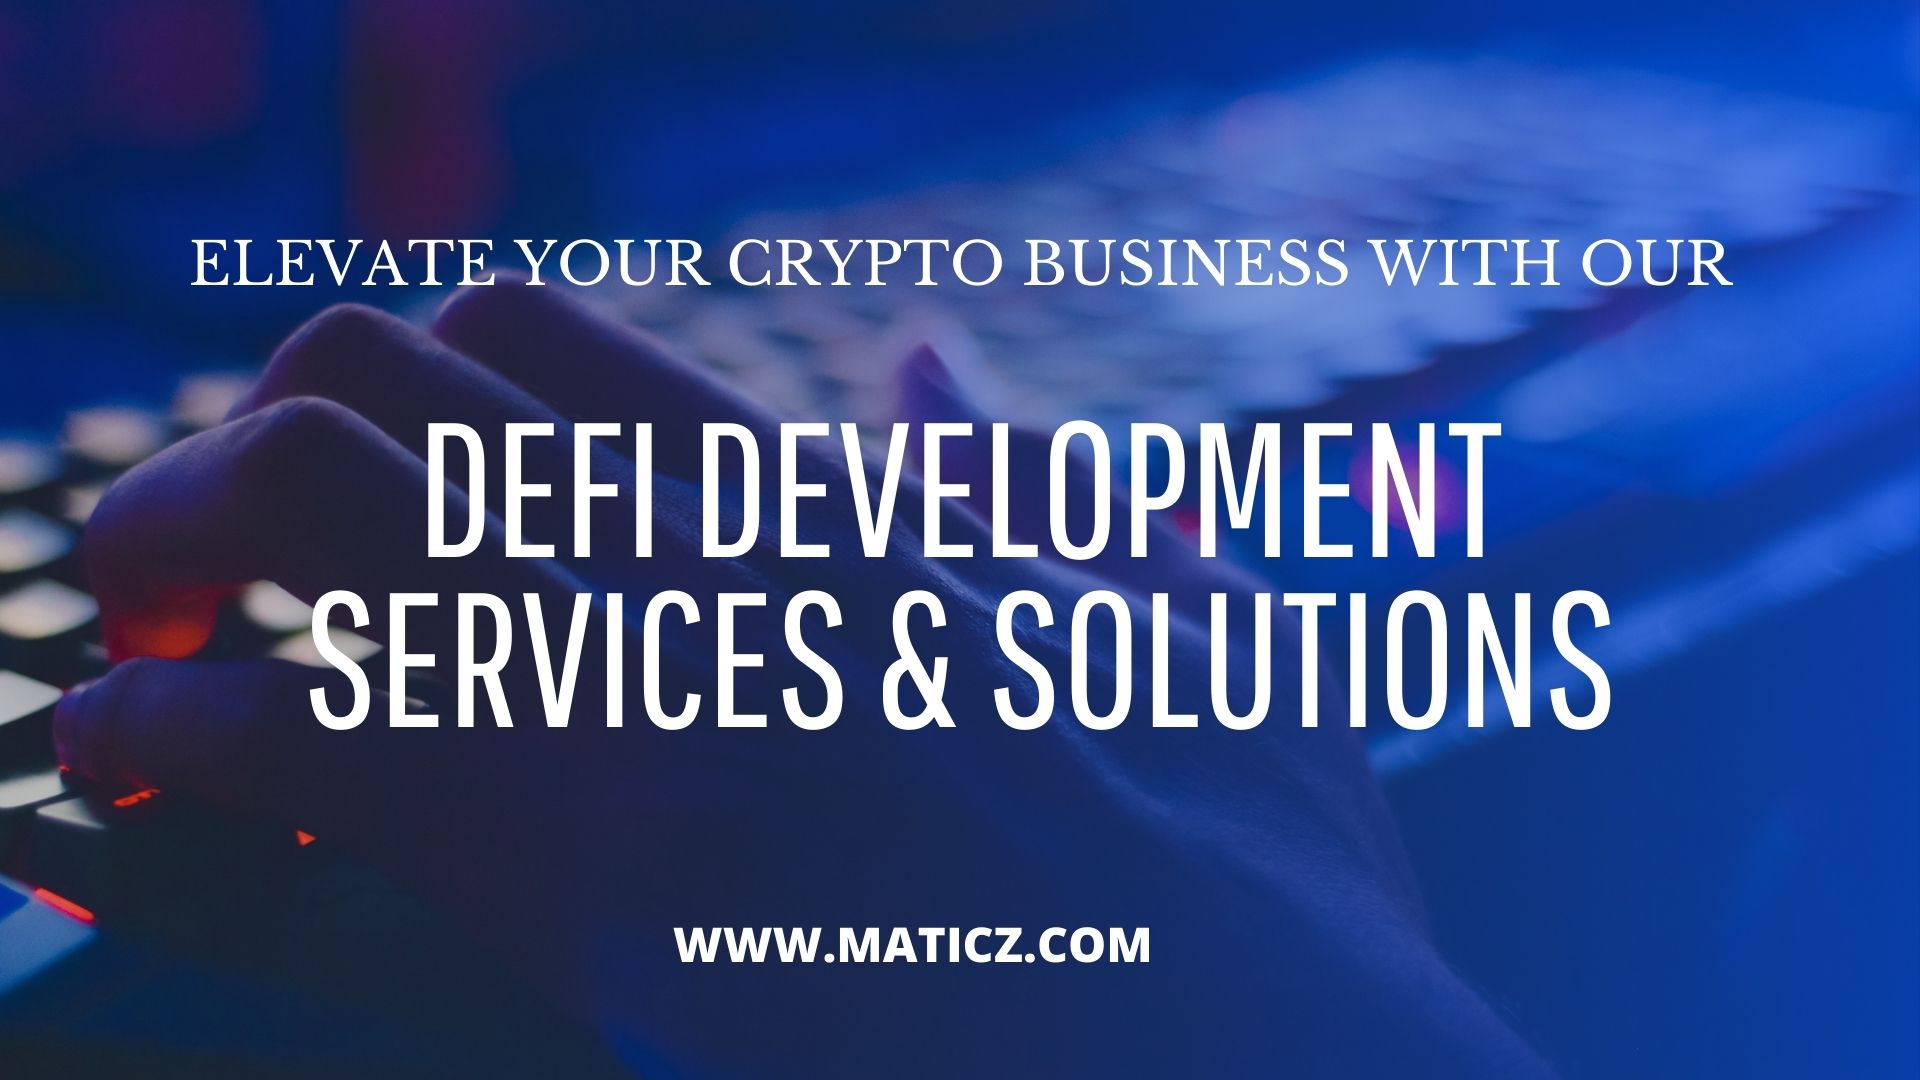 Article about Bring Potential Transition to Your Financial System With DeFi Development Services